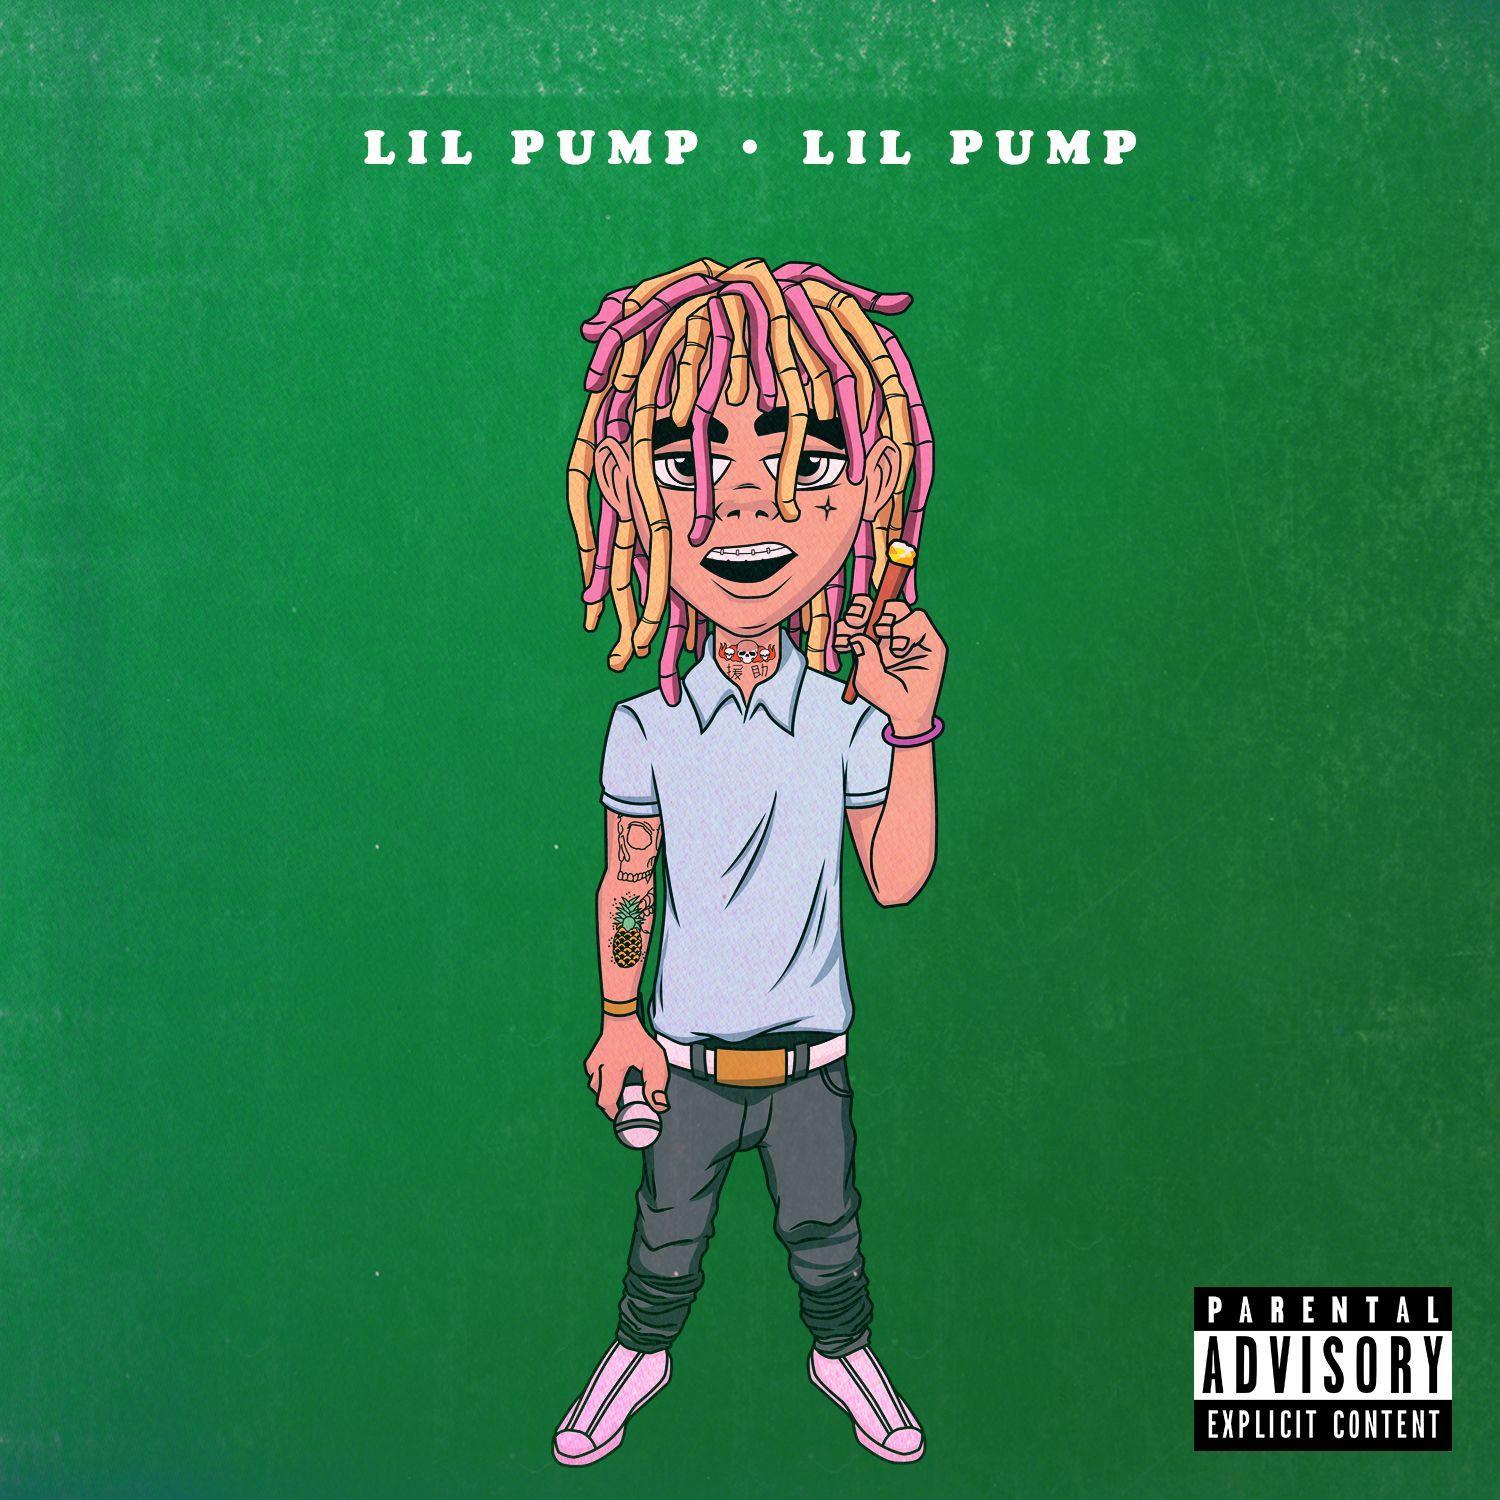 Stream Free Songs by Lil Pump & Similar Artists